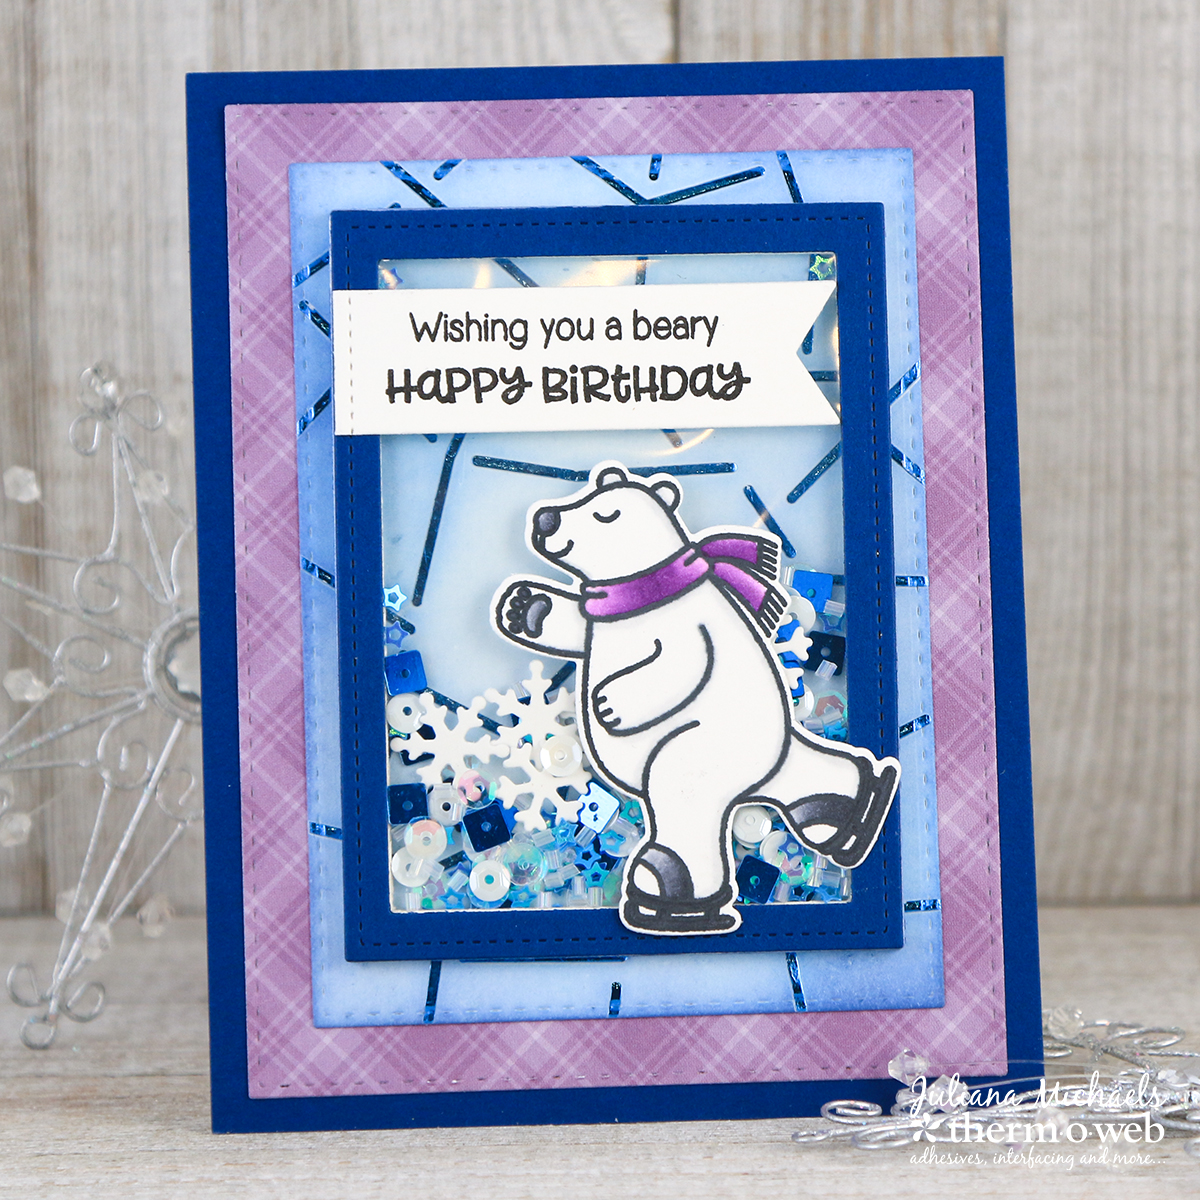 Happy Birthday Shaker Card by Juliana Michaels featuring Therm O Web Clear Toner Sheets, Deco Foil, Stencils and Adhesives